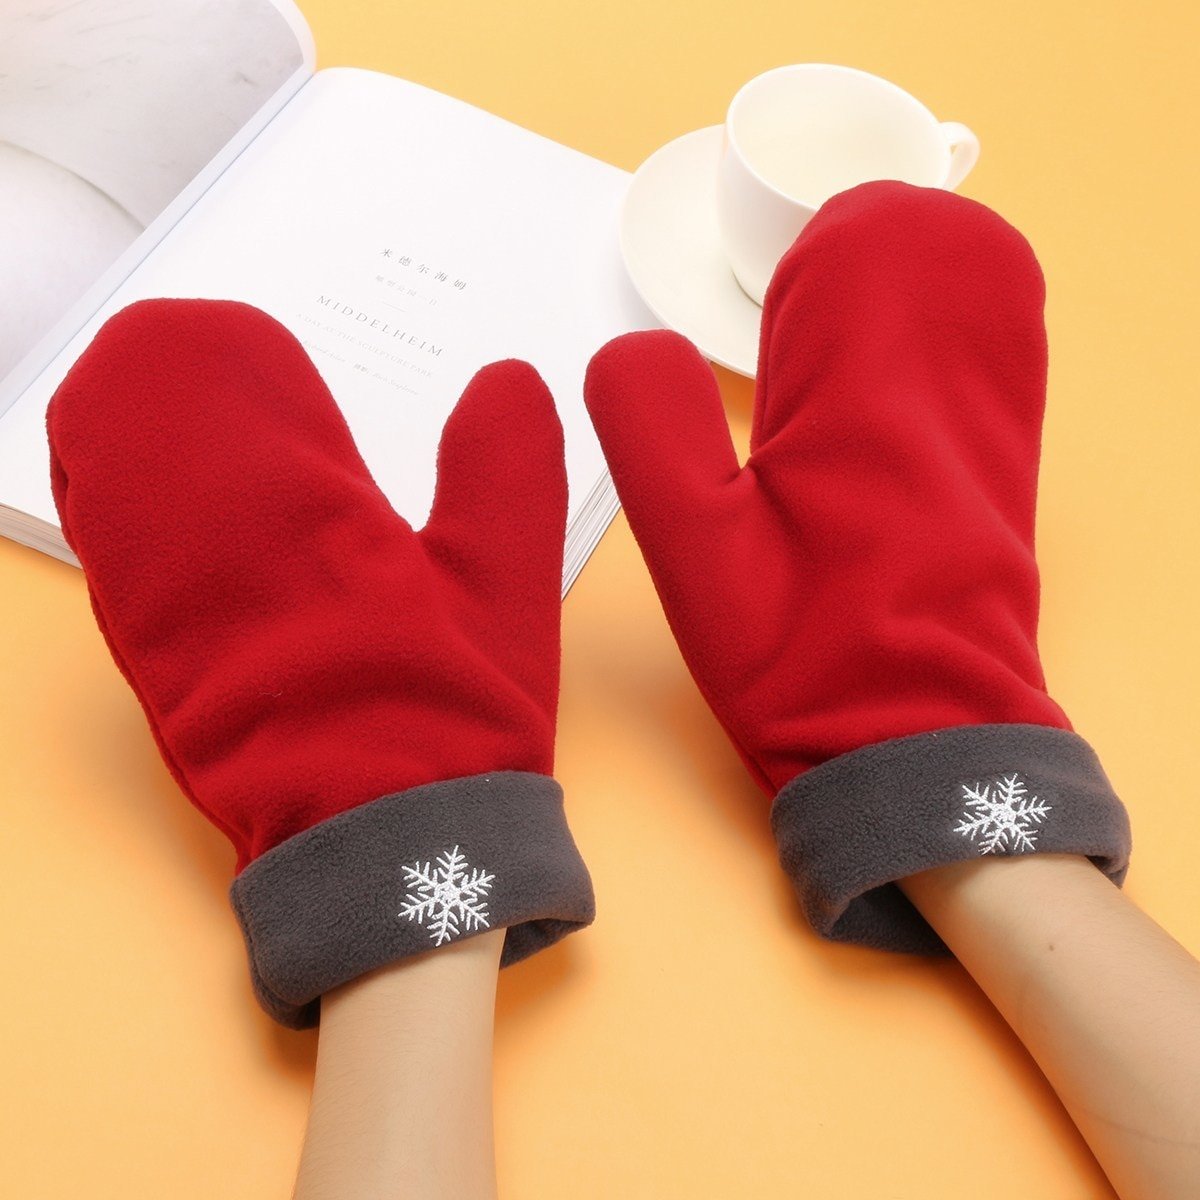 Couple Lovers Gloves Polar Fleece Sweethearts Thicken Winter Warm Lining Glove Christmas Gift Lovers Mittens